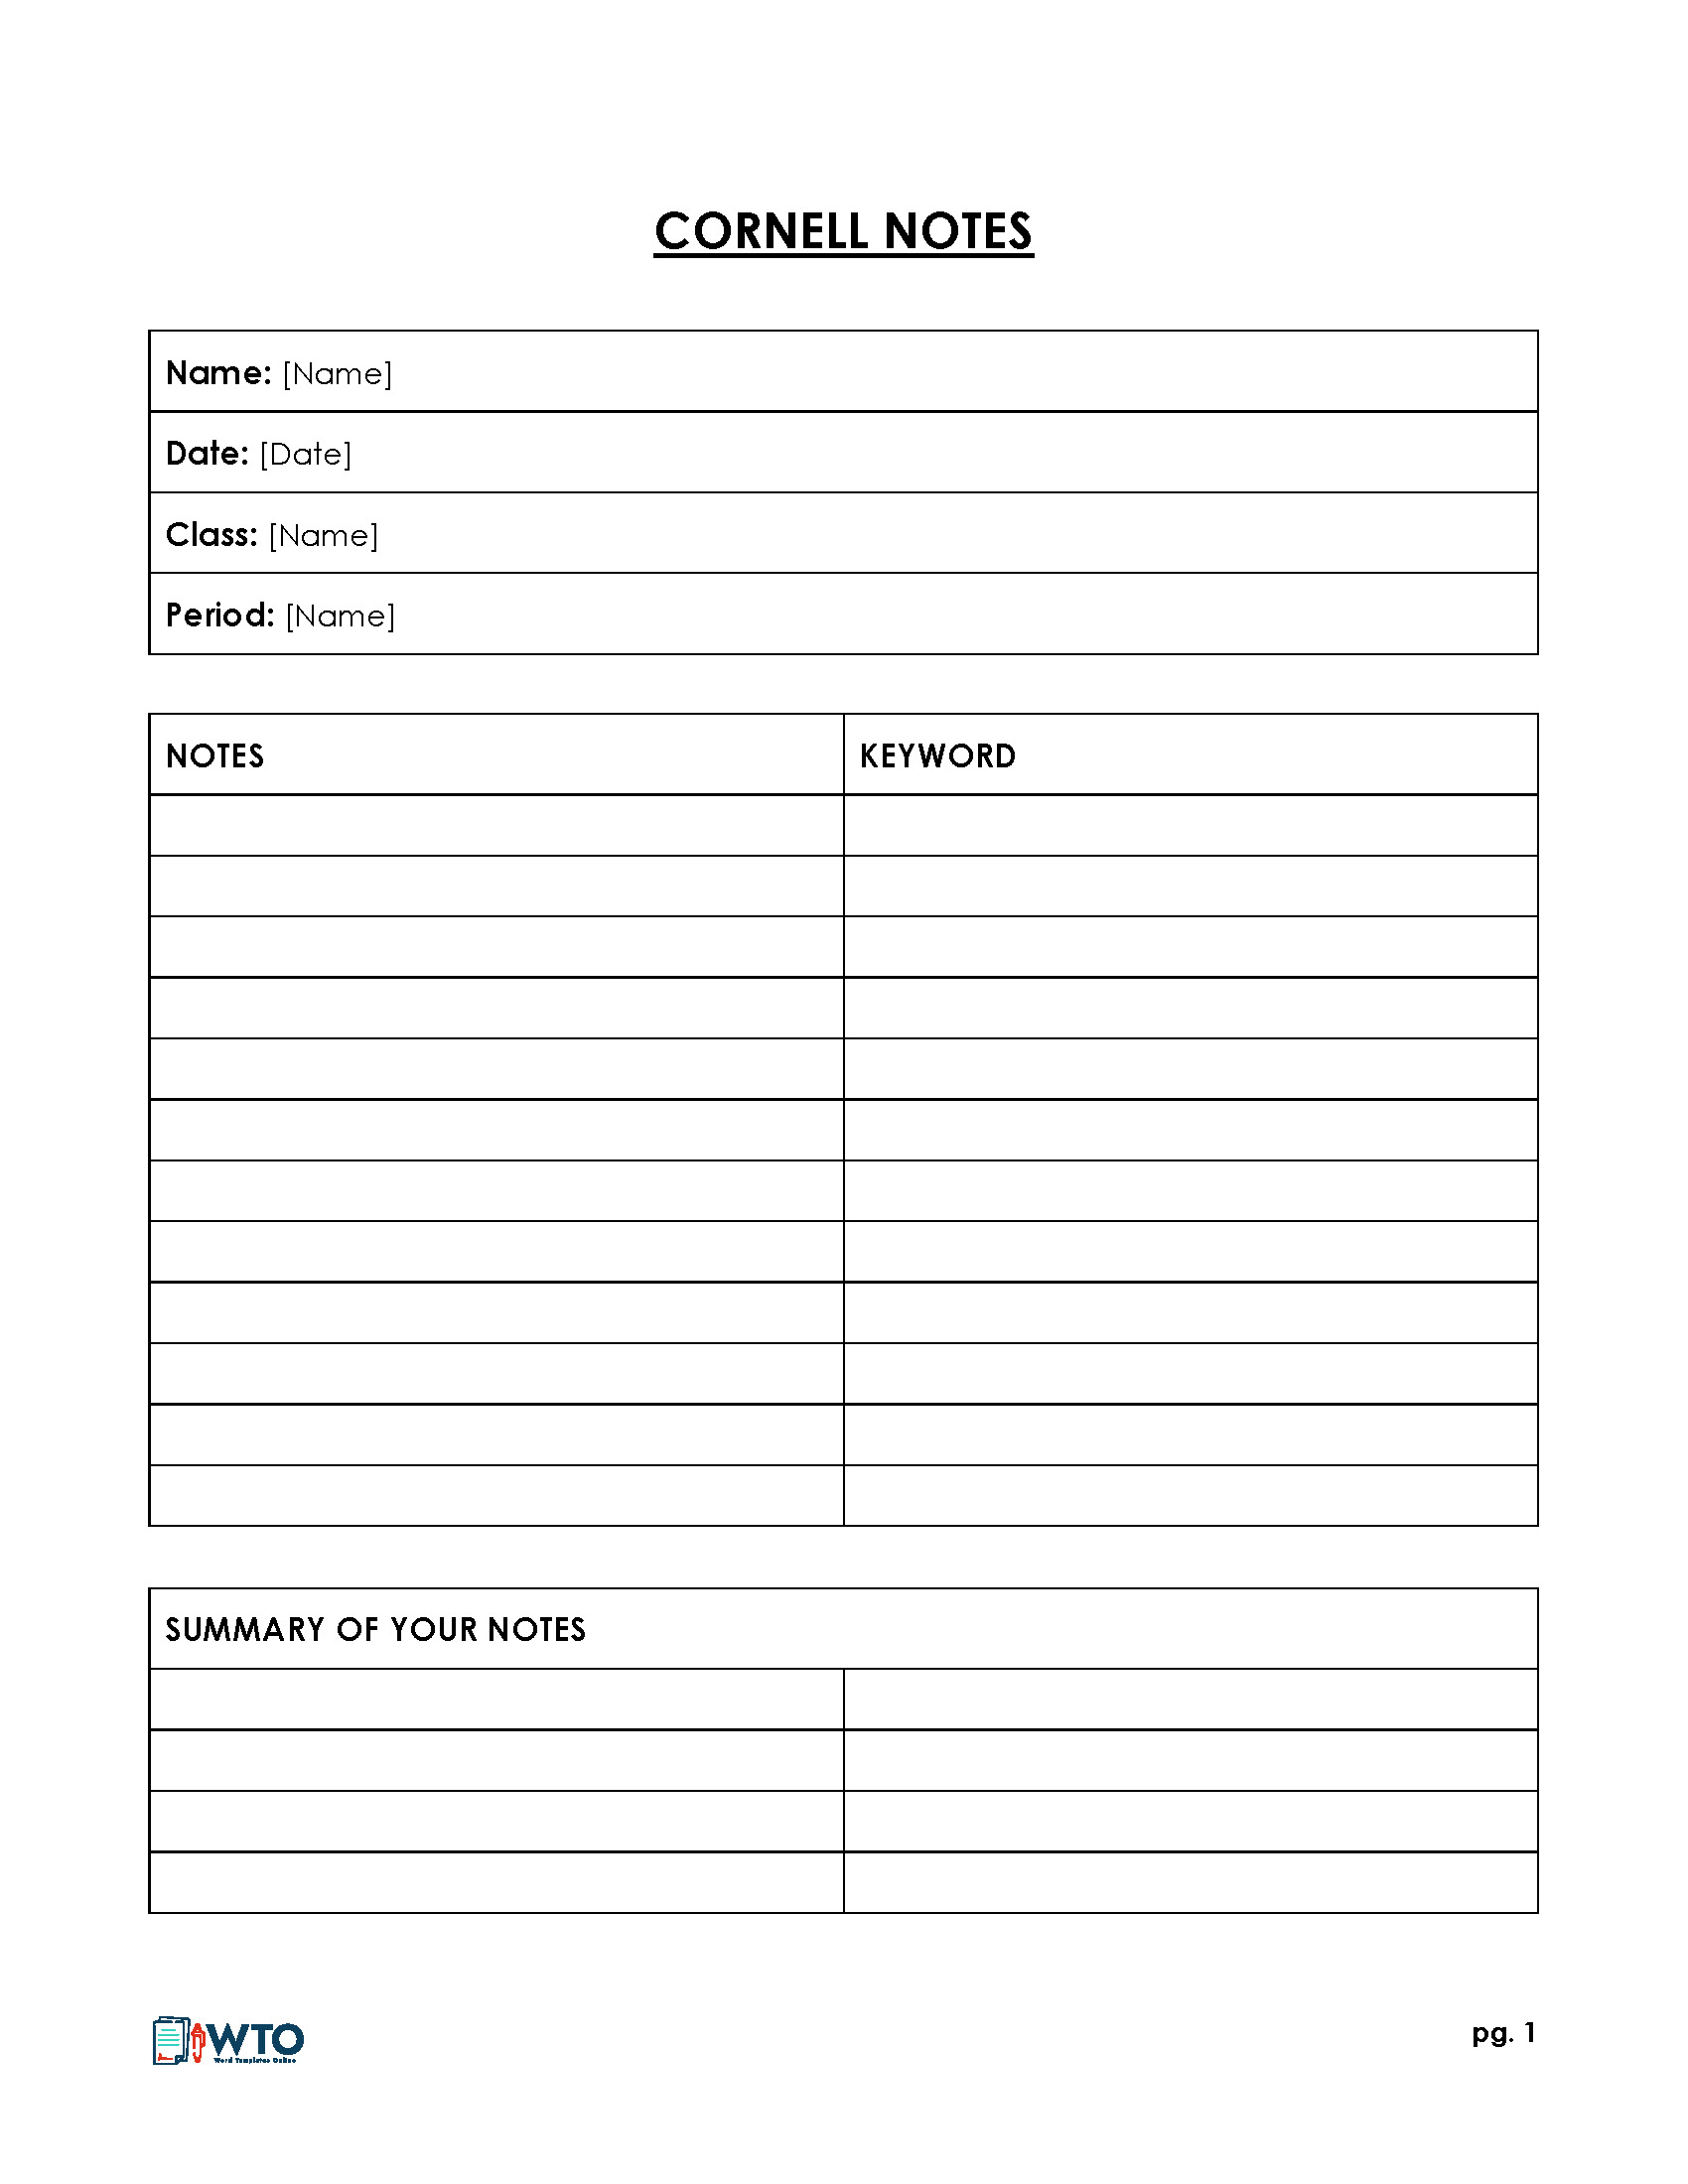 Cornell Notes Template For Word DocTemplates